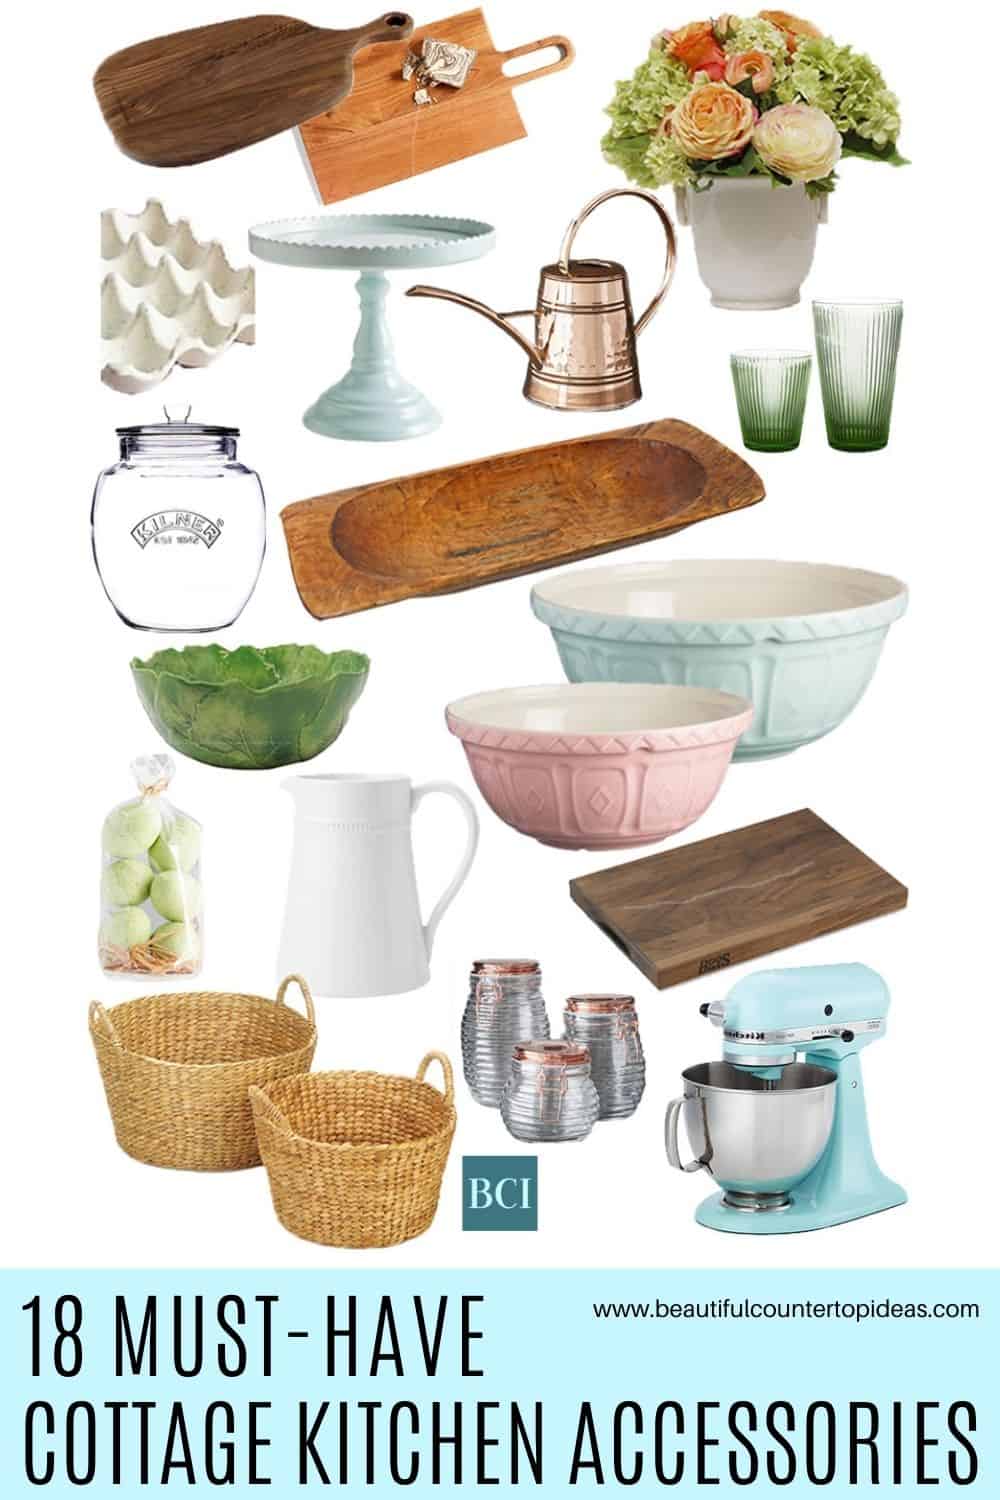 Ready to leave minimalism behind? This collection of cottage kitchen accessories will brighten your countertops with plenty of style and charm.